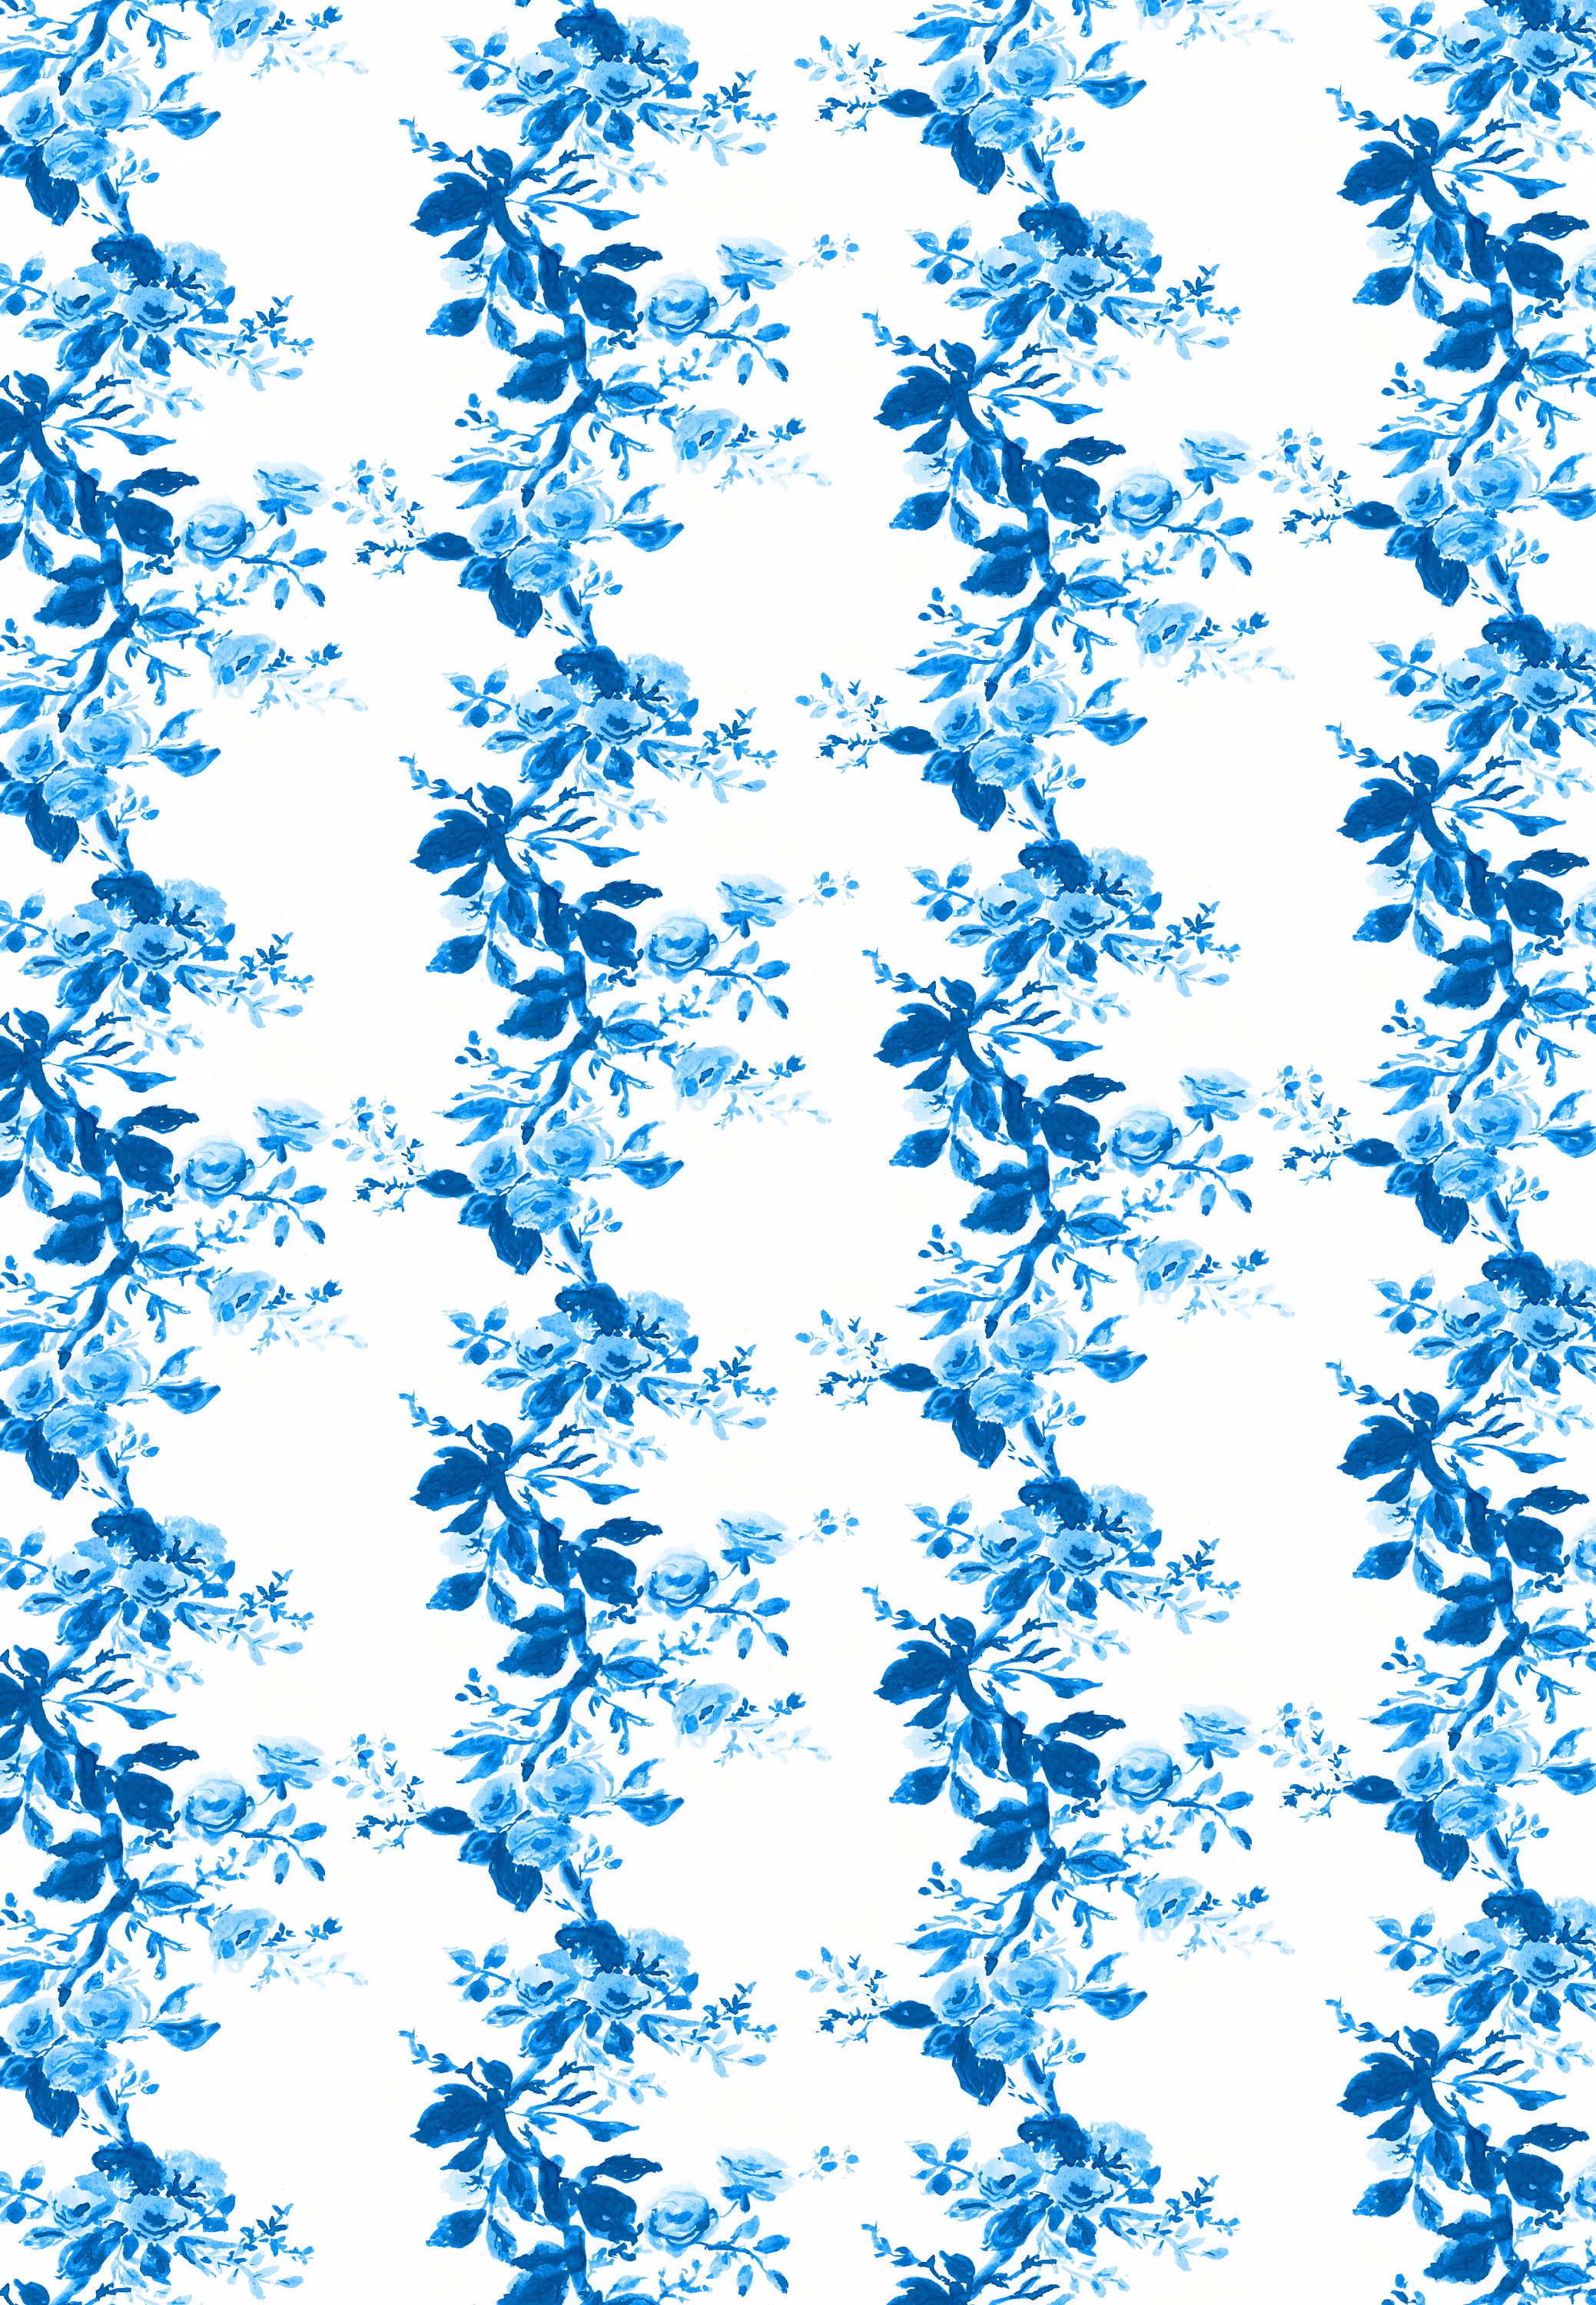 Wrapping Paper: Blue Floral Vine gift Wrap, Birthday, Holiday, Christmas 